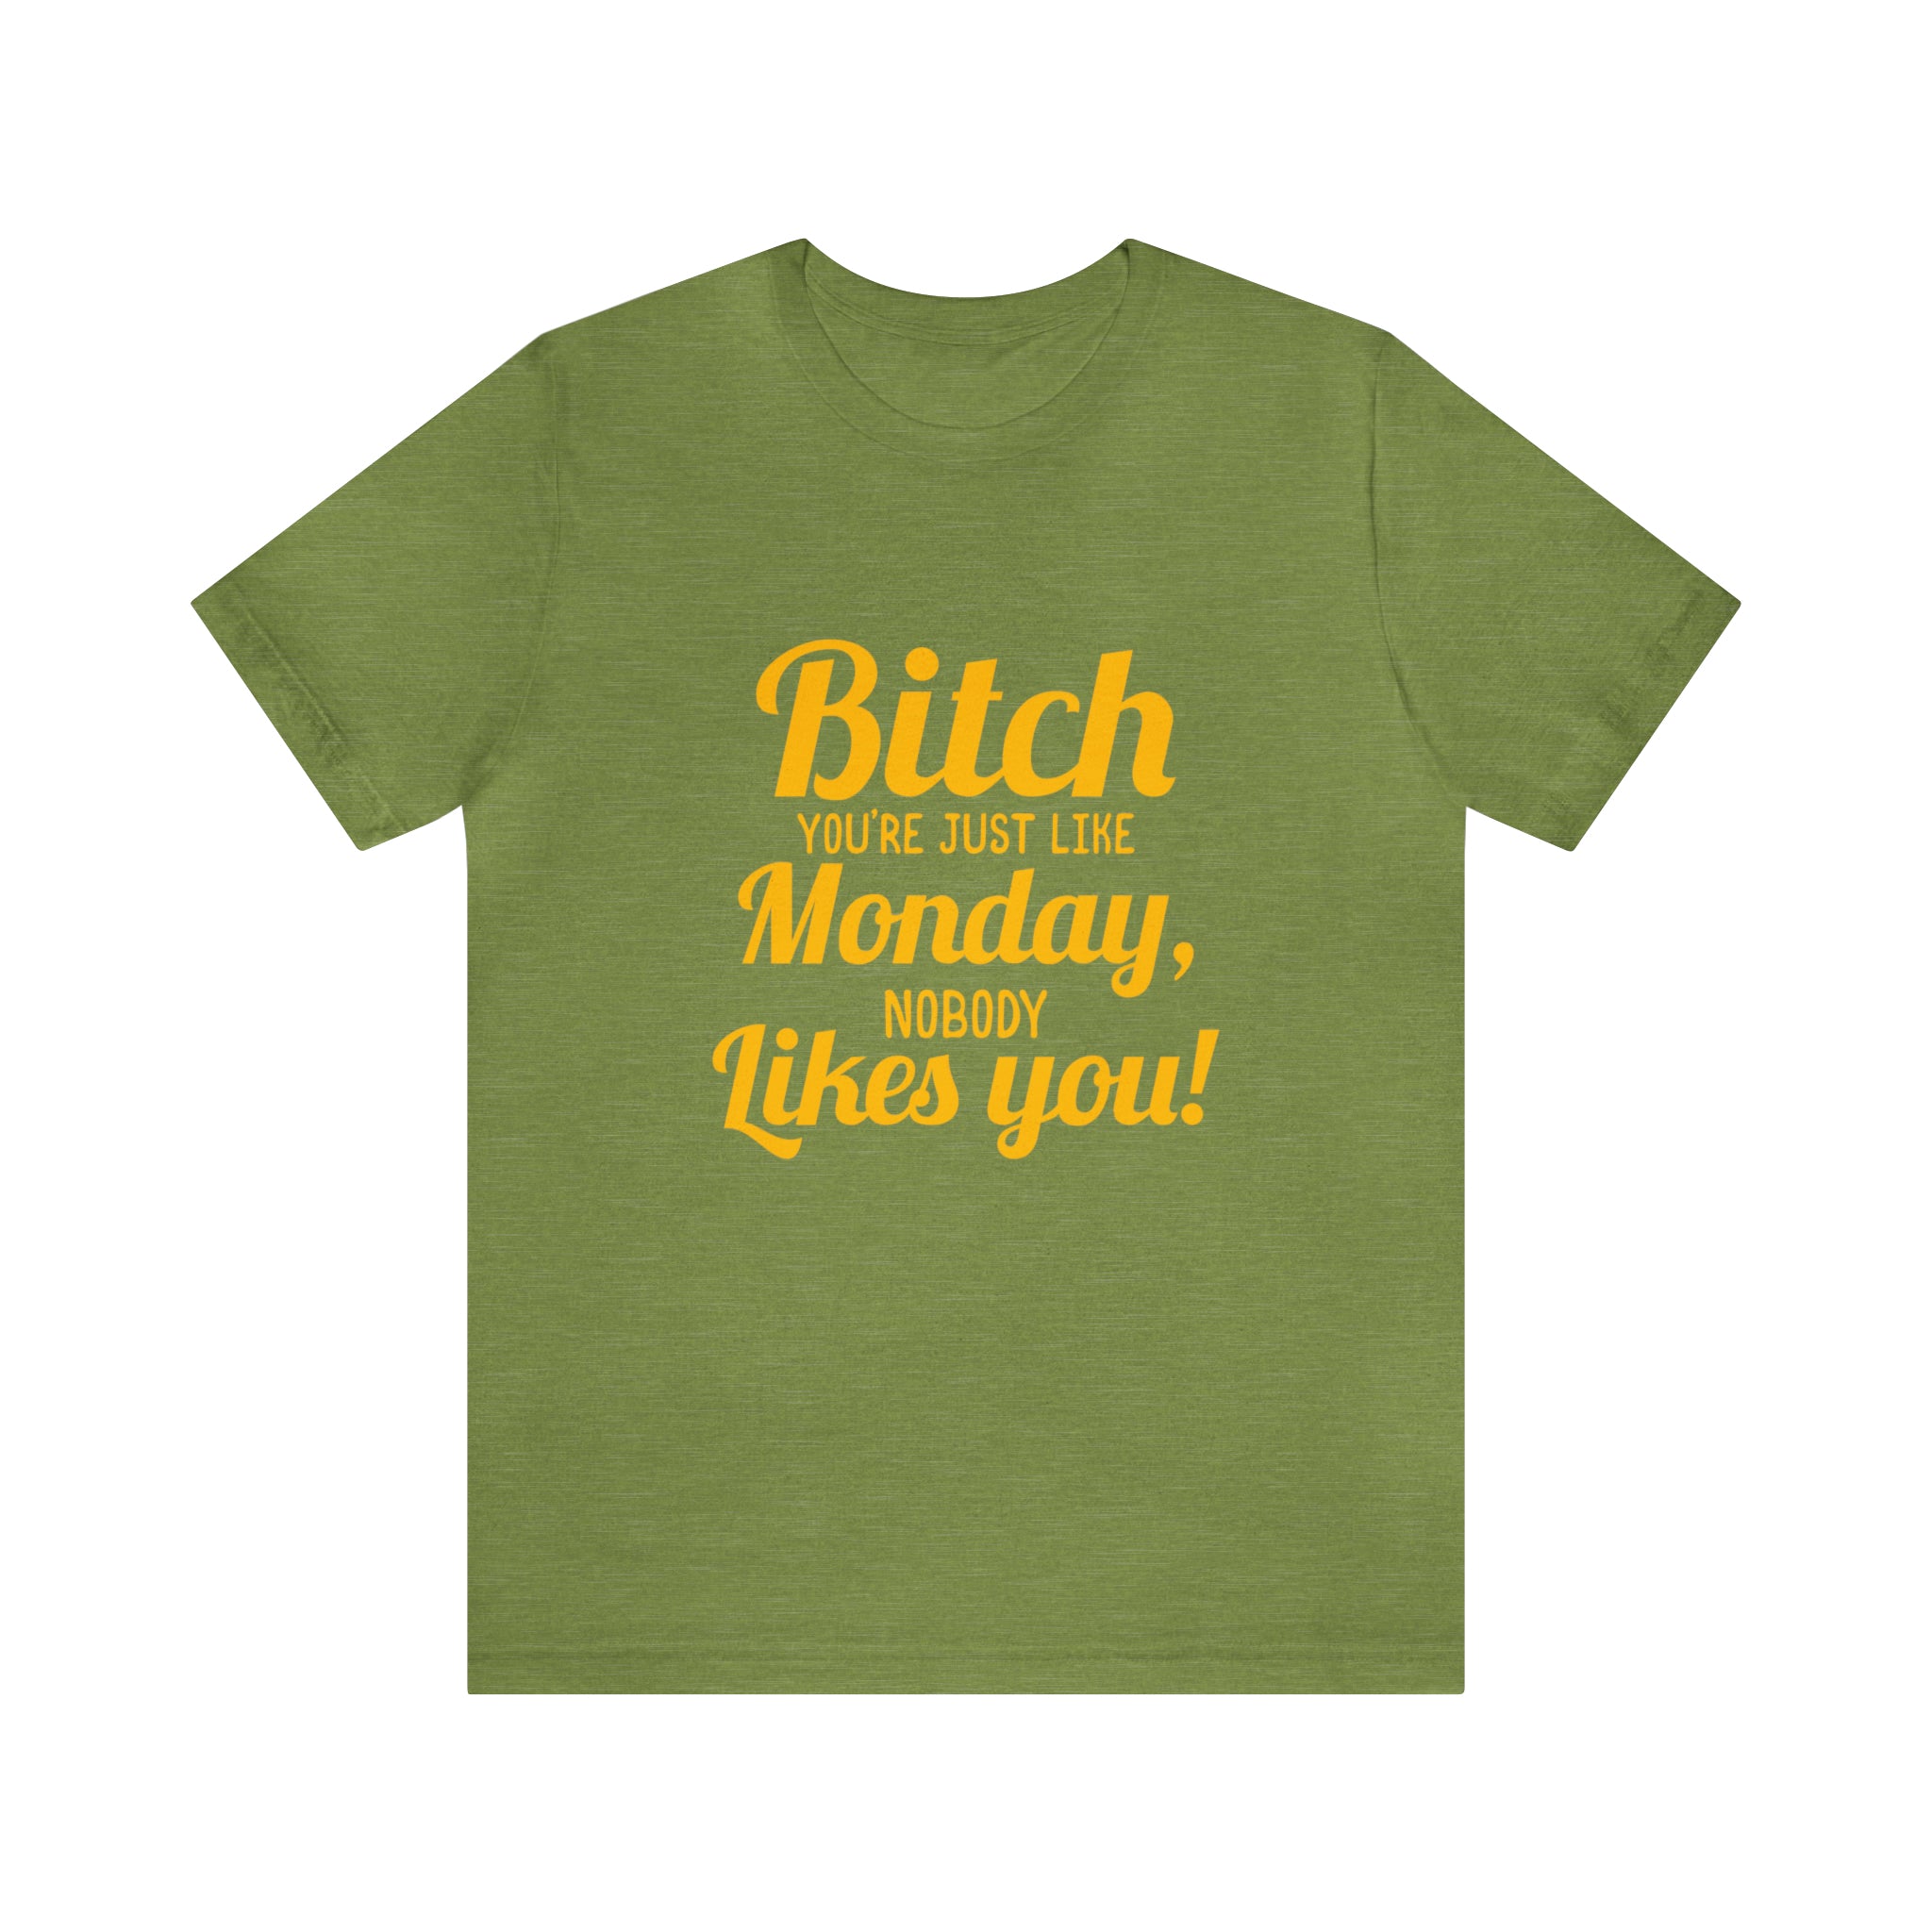 A green Bitch you are just like Monday nobody likes you T-shirt that shows off your rebellious style.